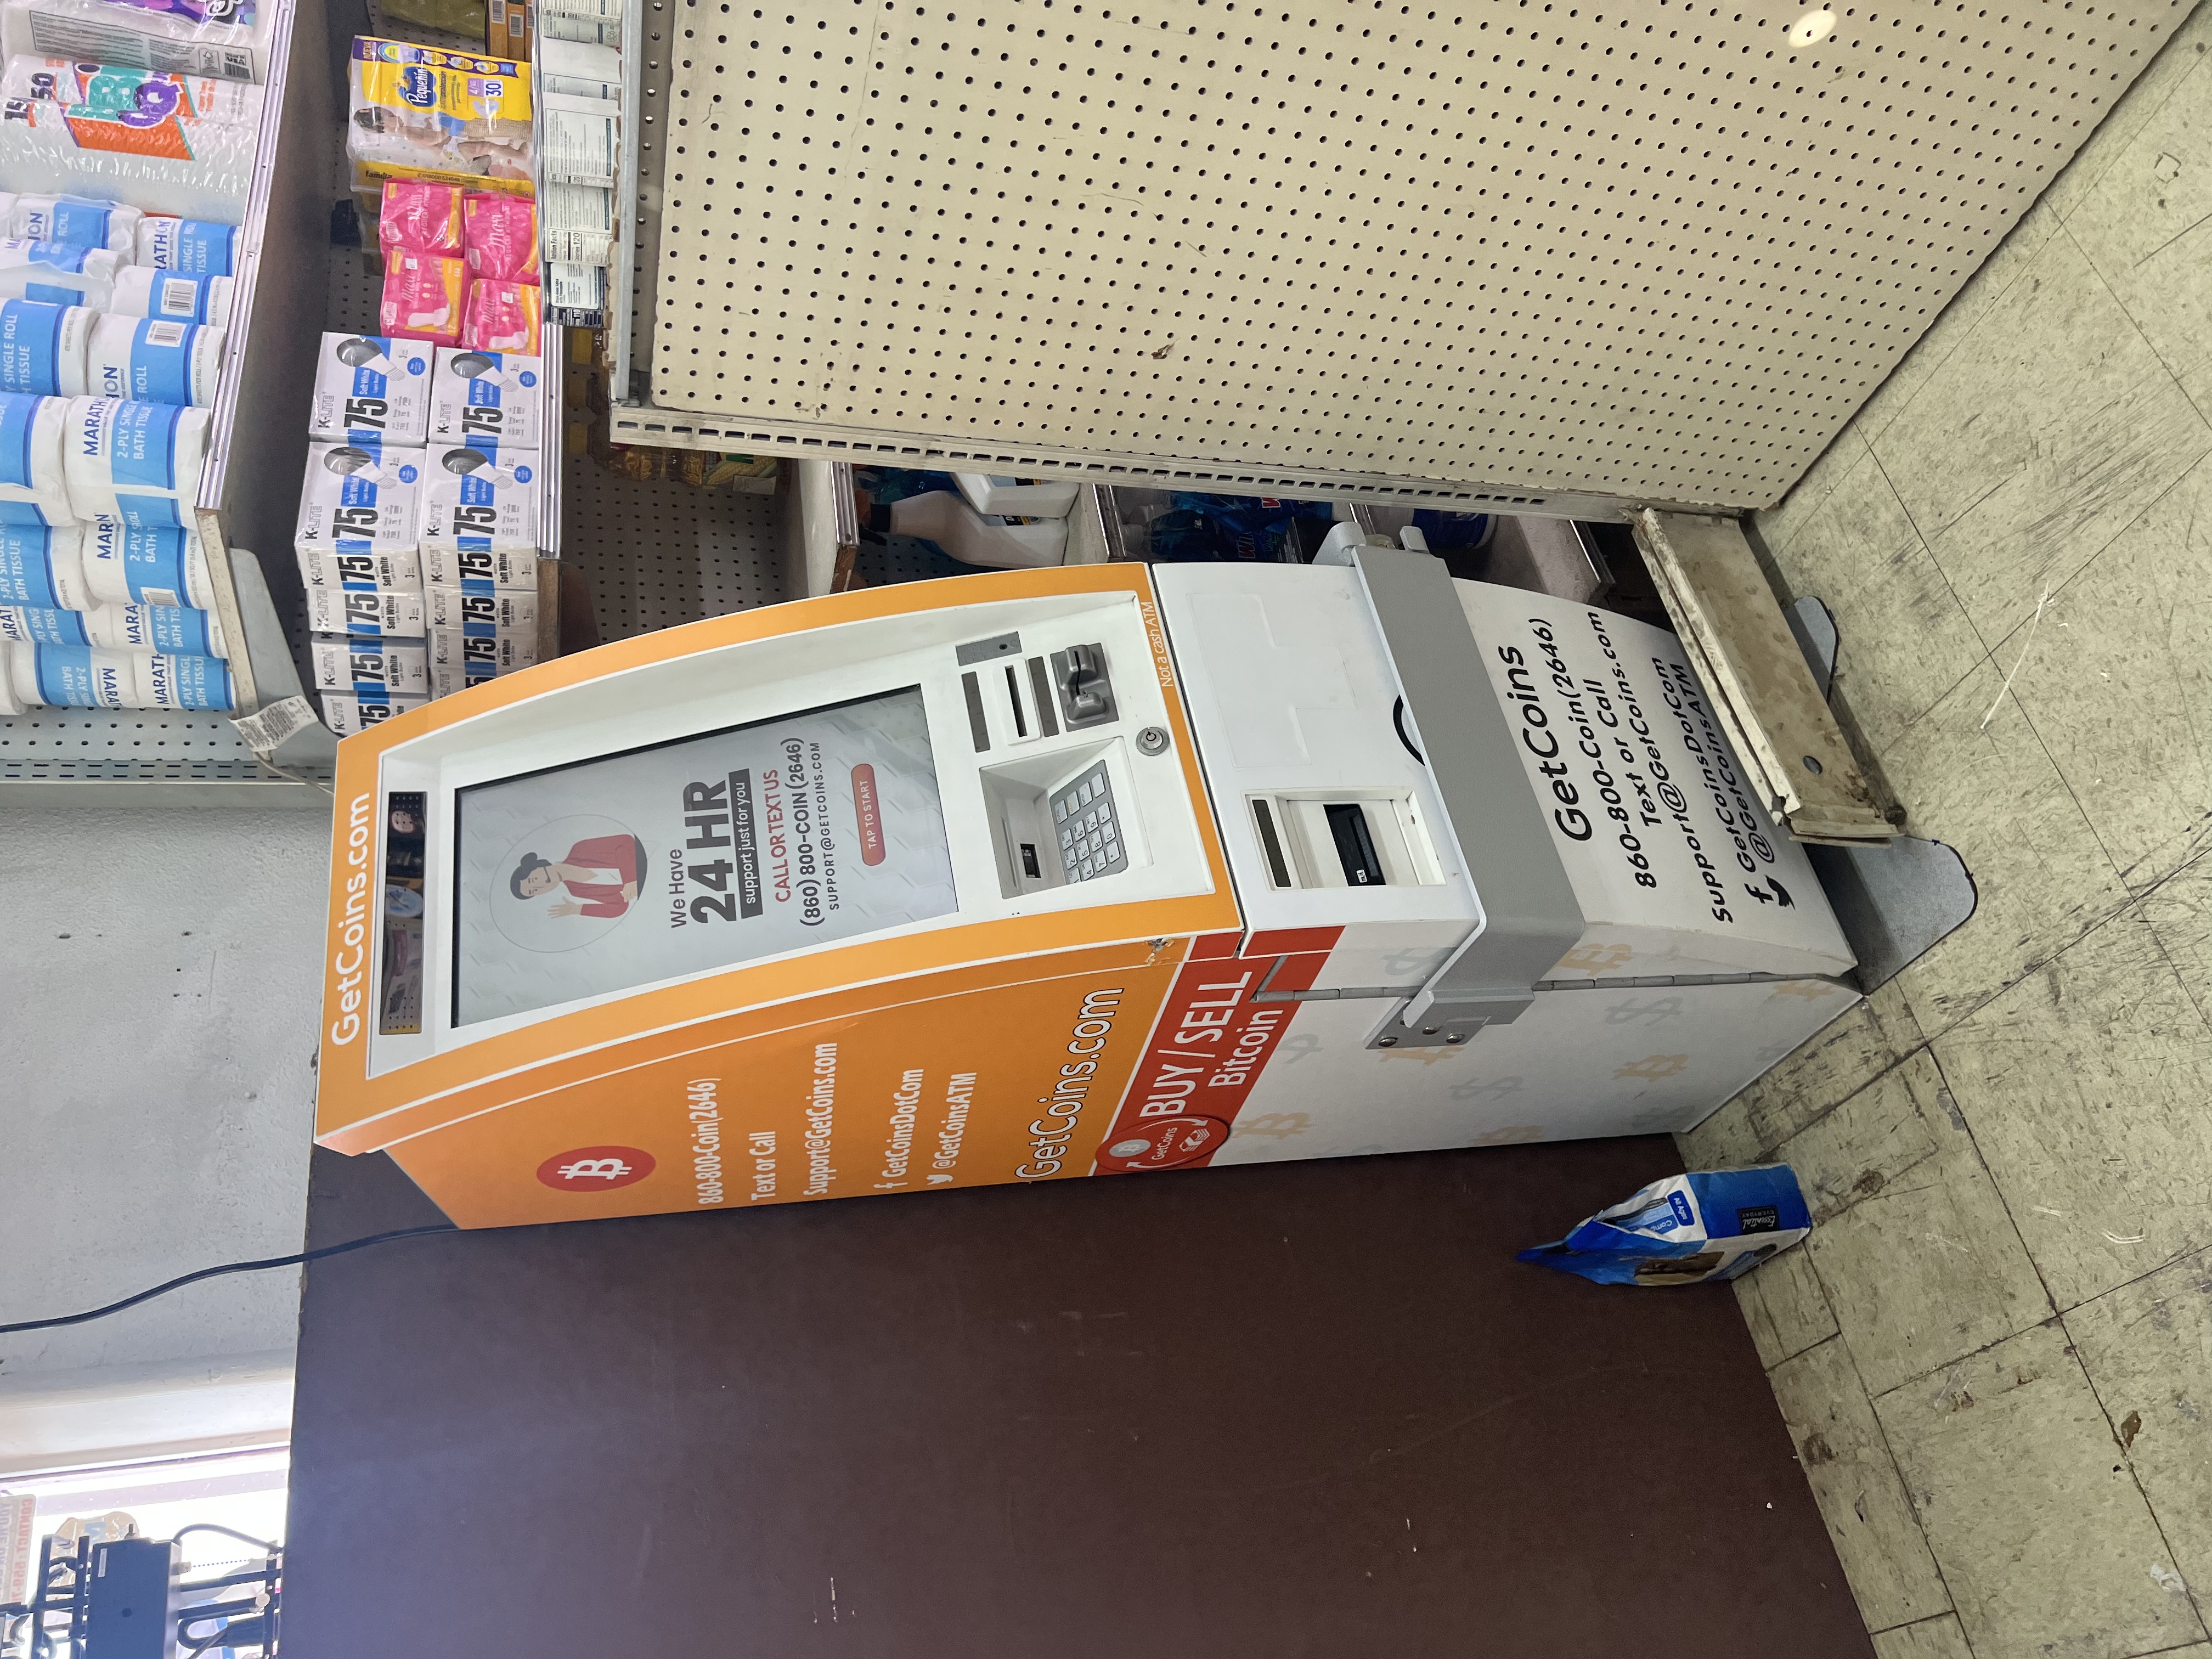 Getcoins - Bitcoin ATM - Inside of Palm's Liquor Store in Bakersfield, California